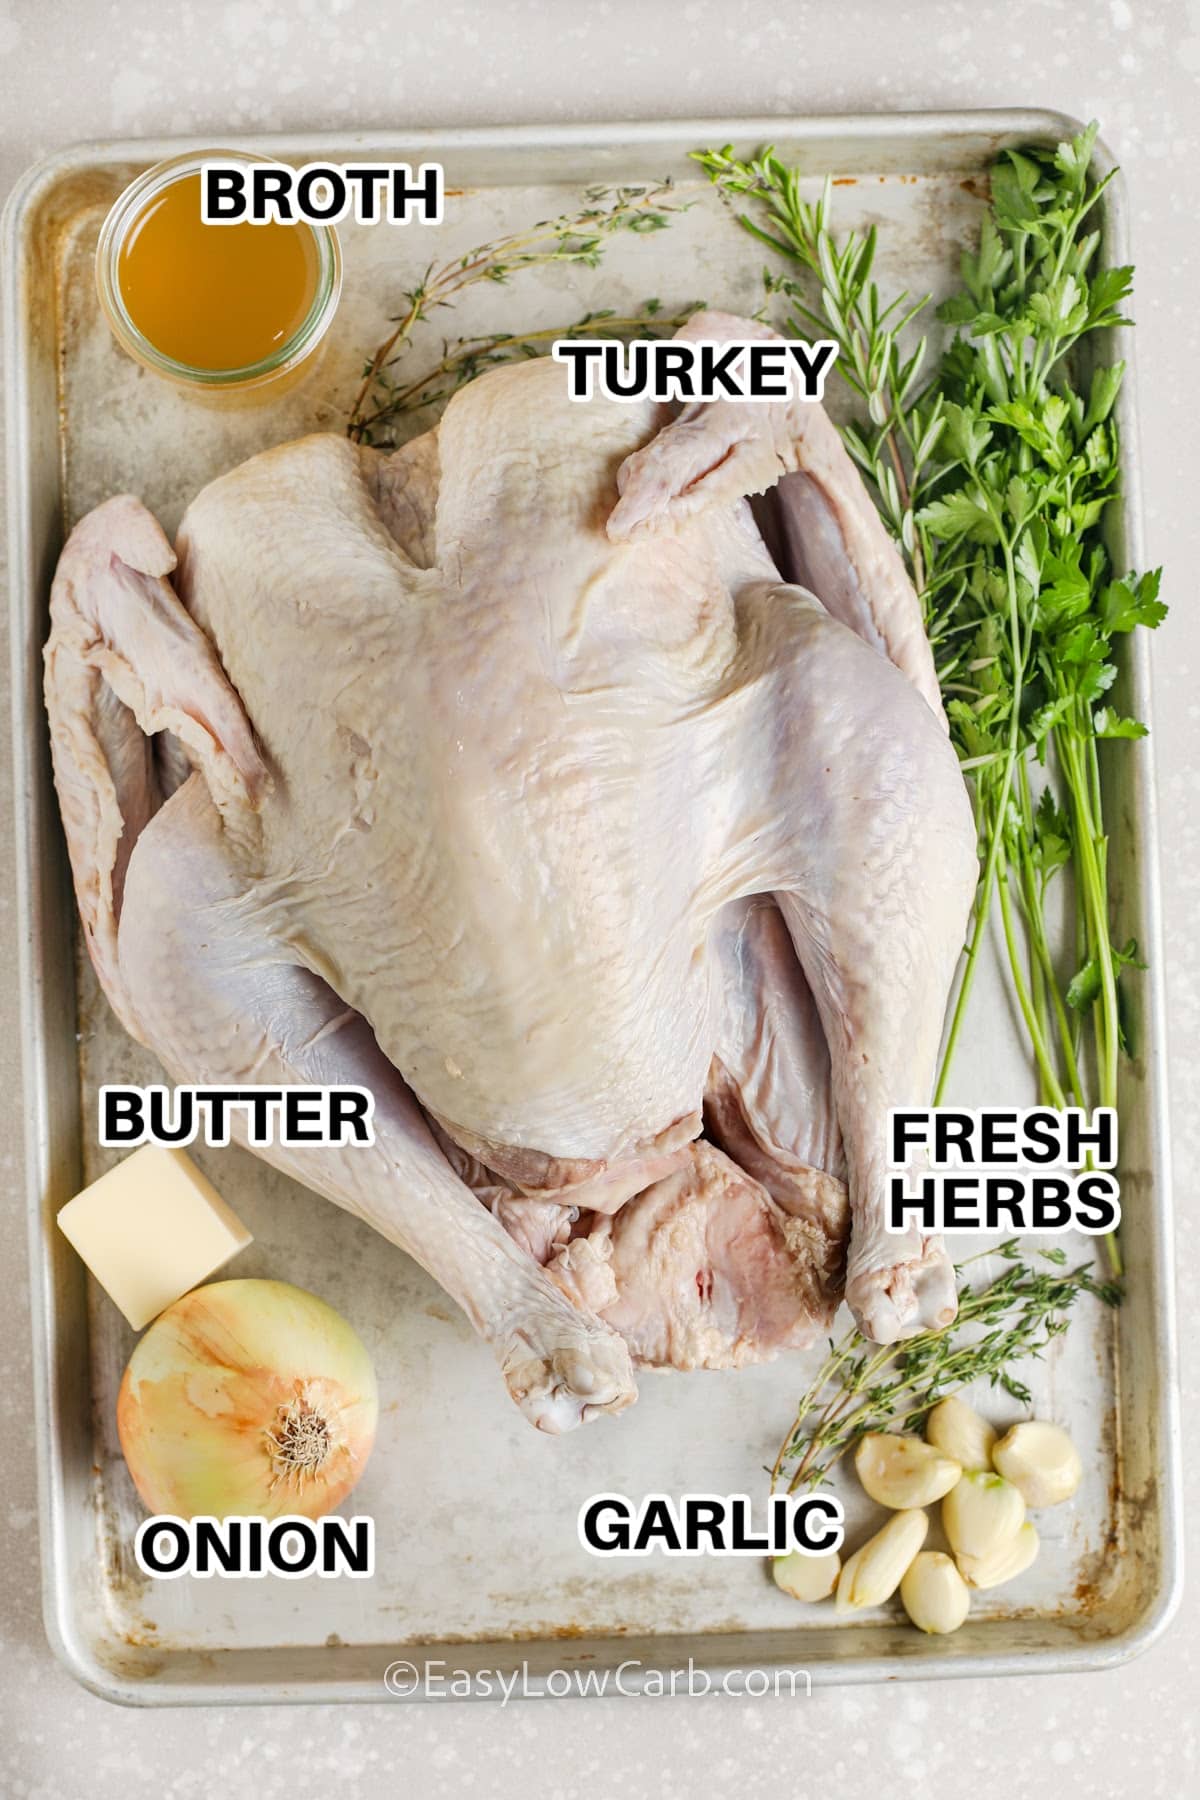 ingredients to make oven roasted turkey on a baking tray labeled: turkey, broth, butter, onion, garlic, and fresh herbs